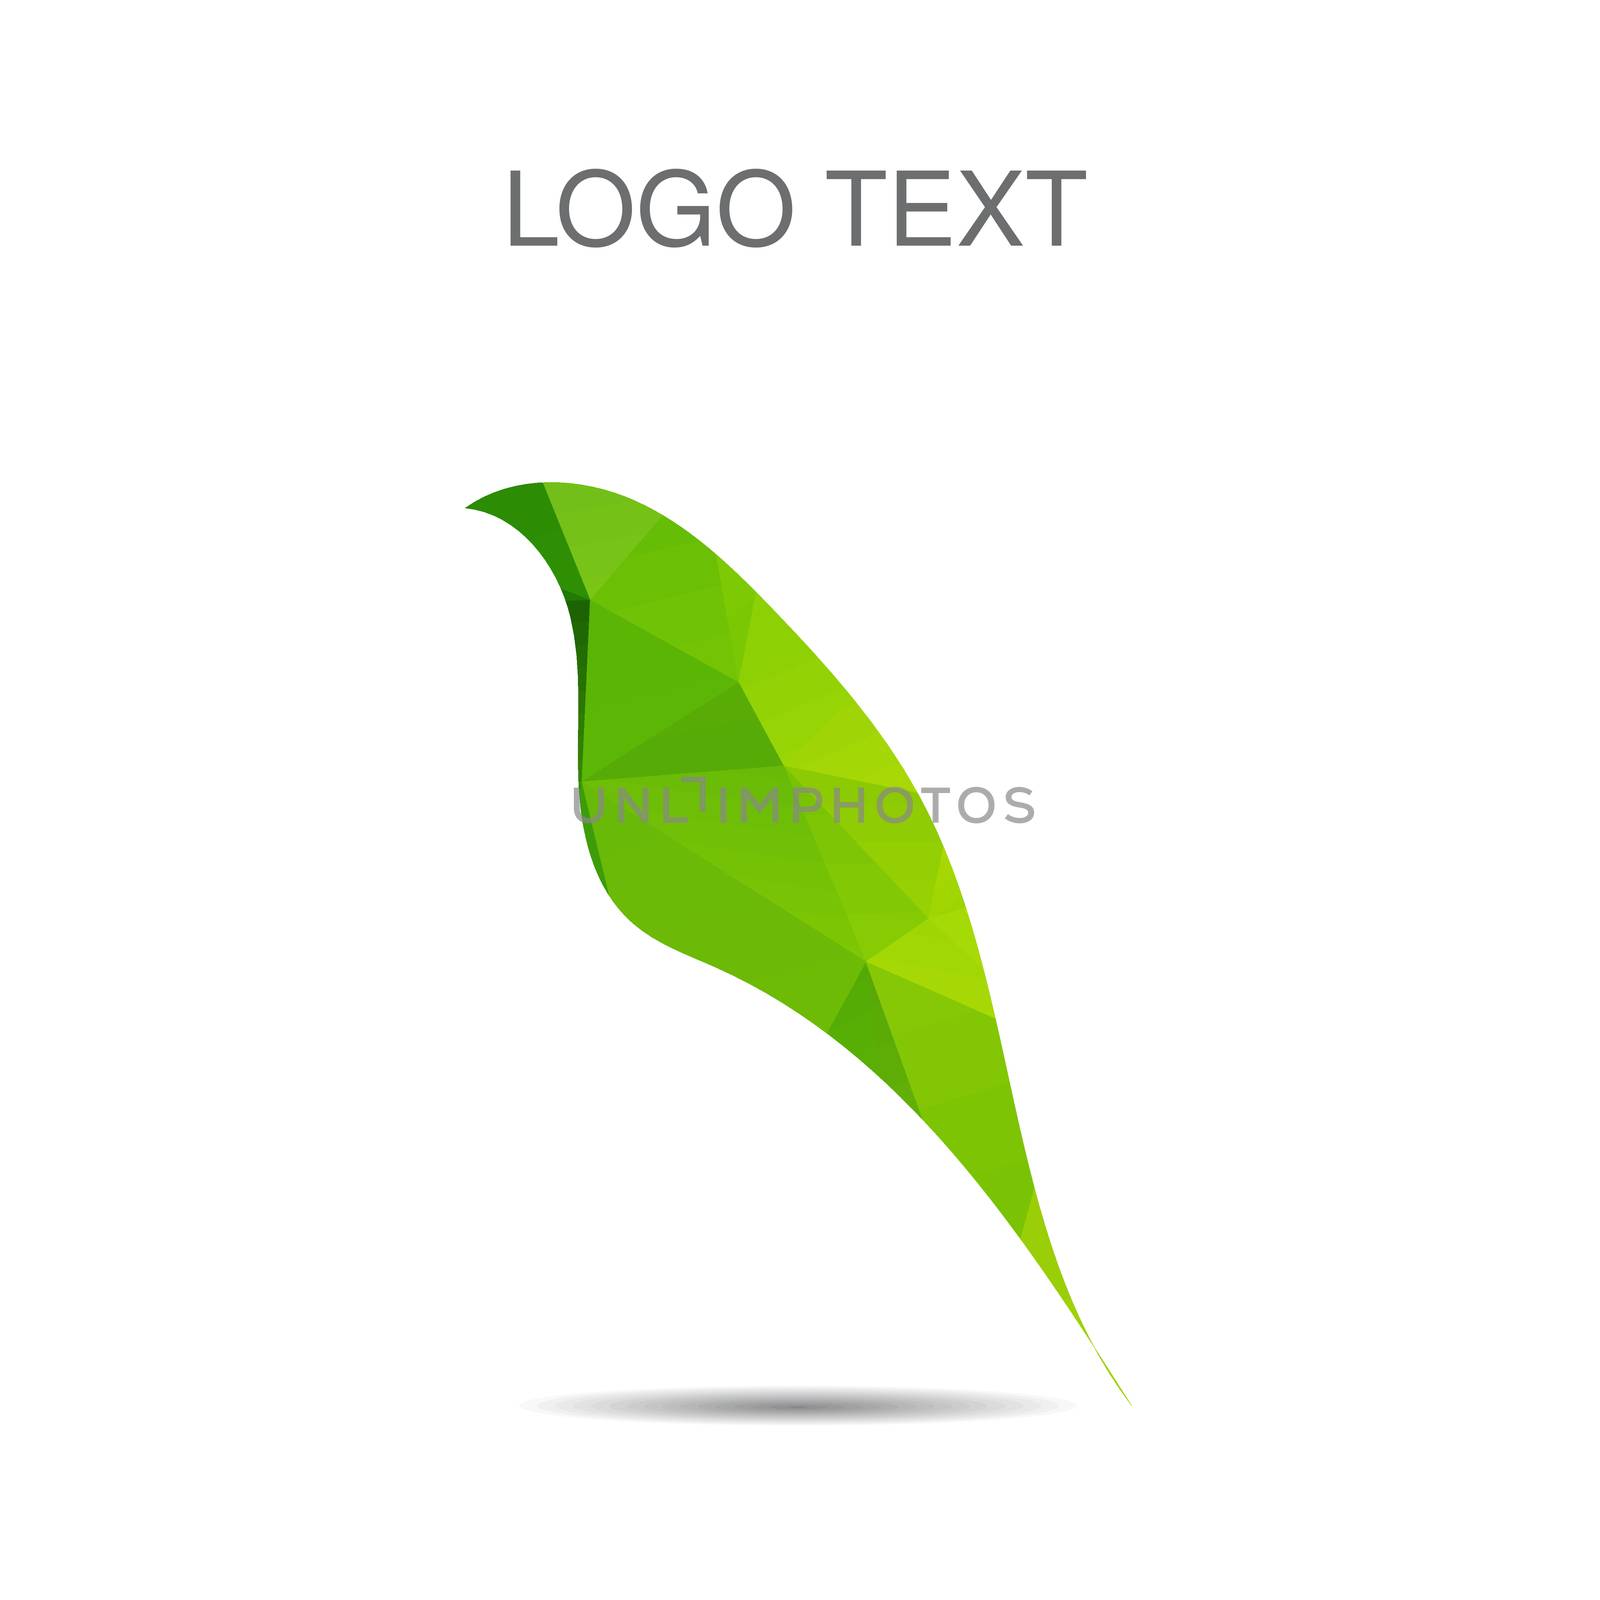 Vector ecology logo or icon in eps, nature logotype